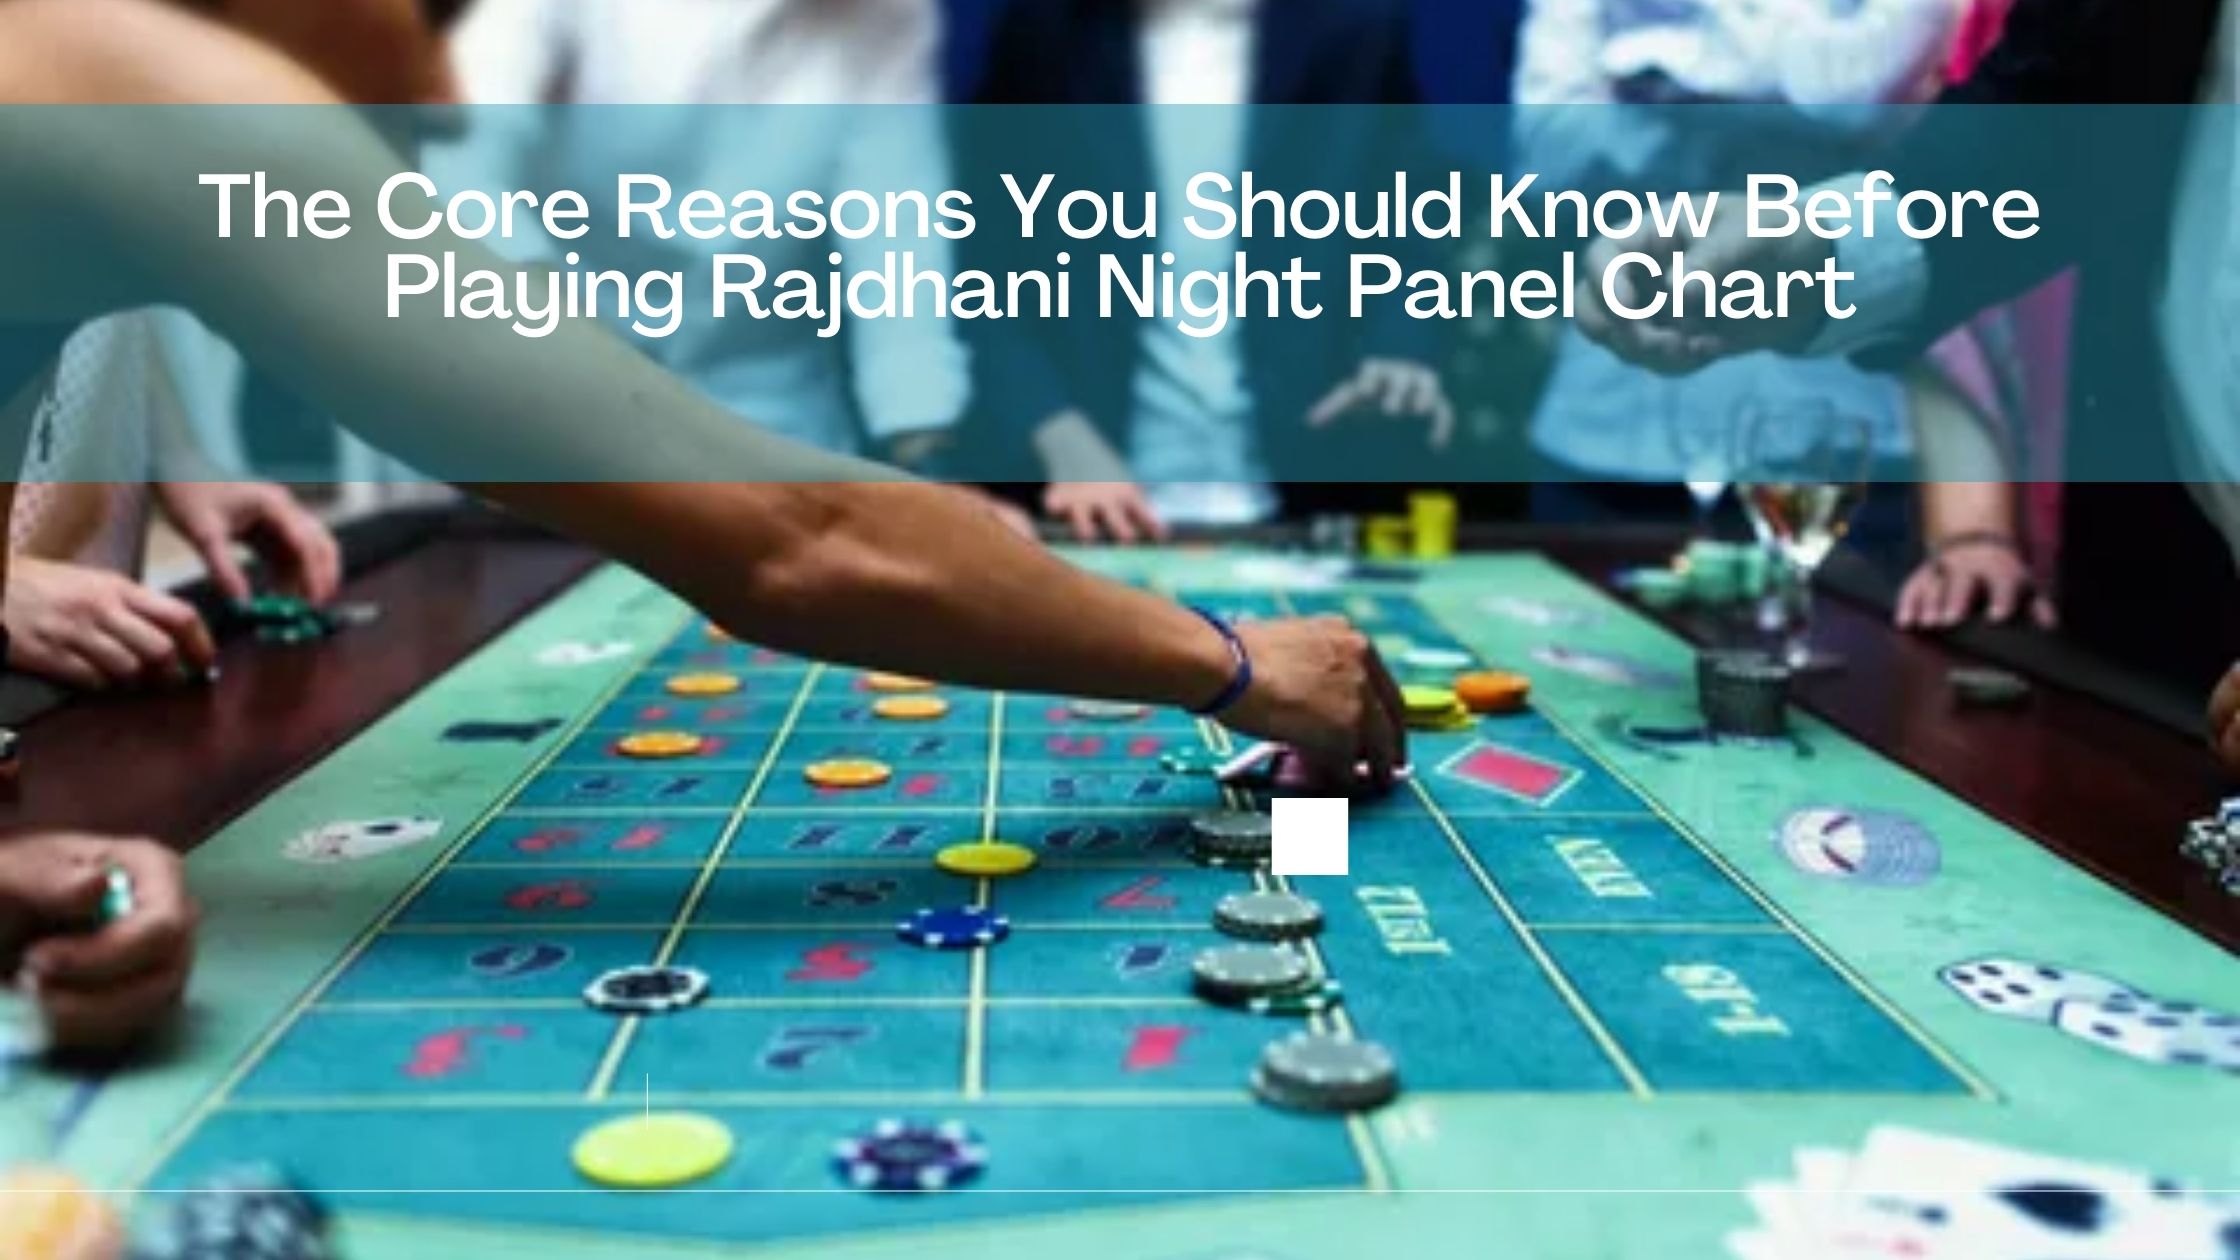 The Core Reasons You Should Know Before Playing Rajdhani Night Panel Chart